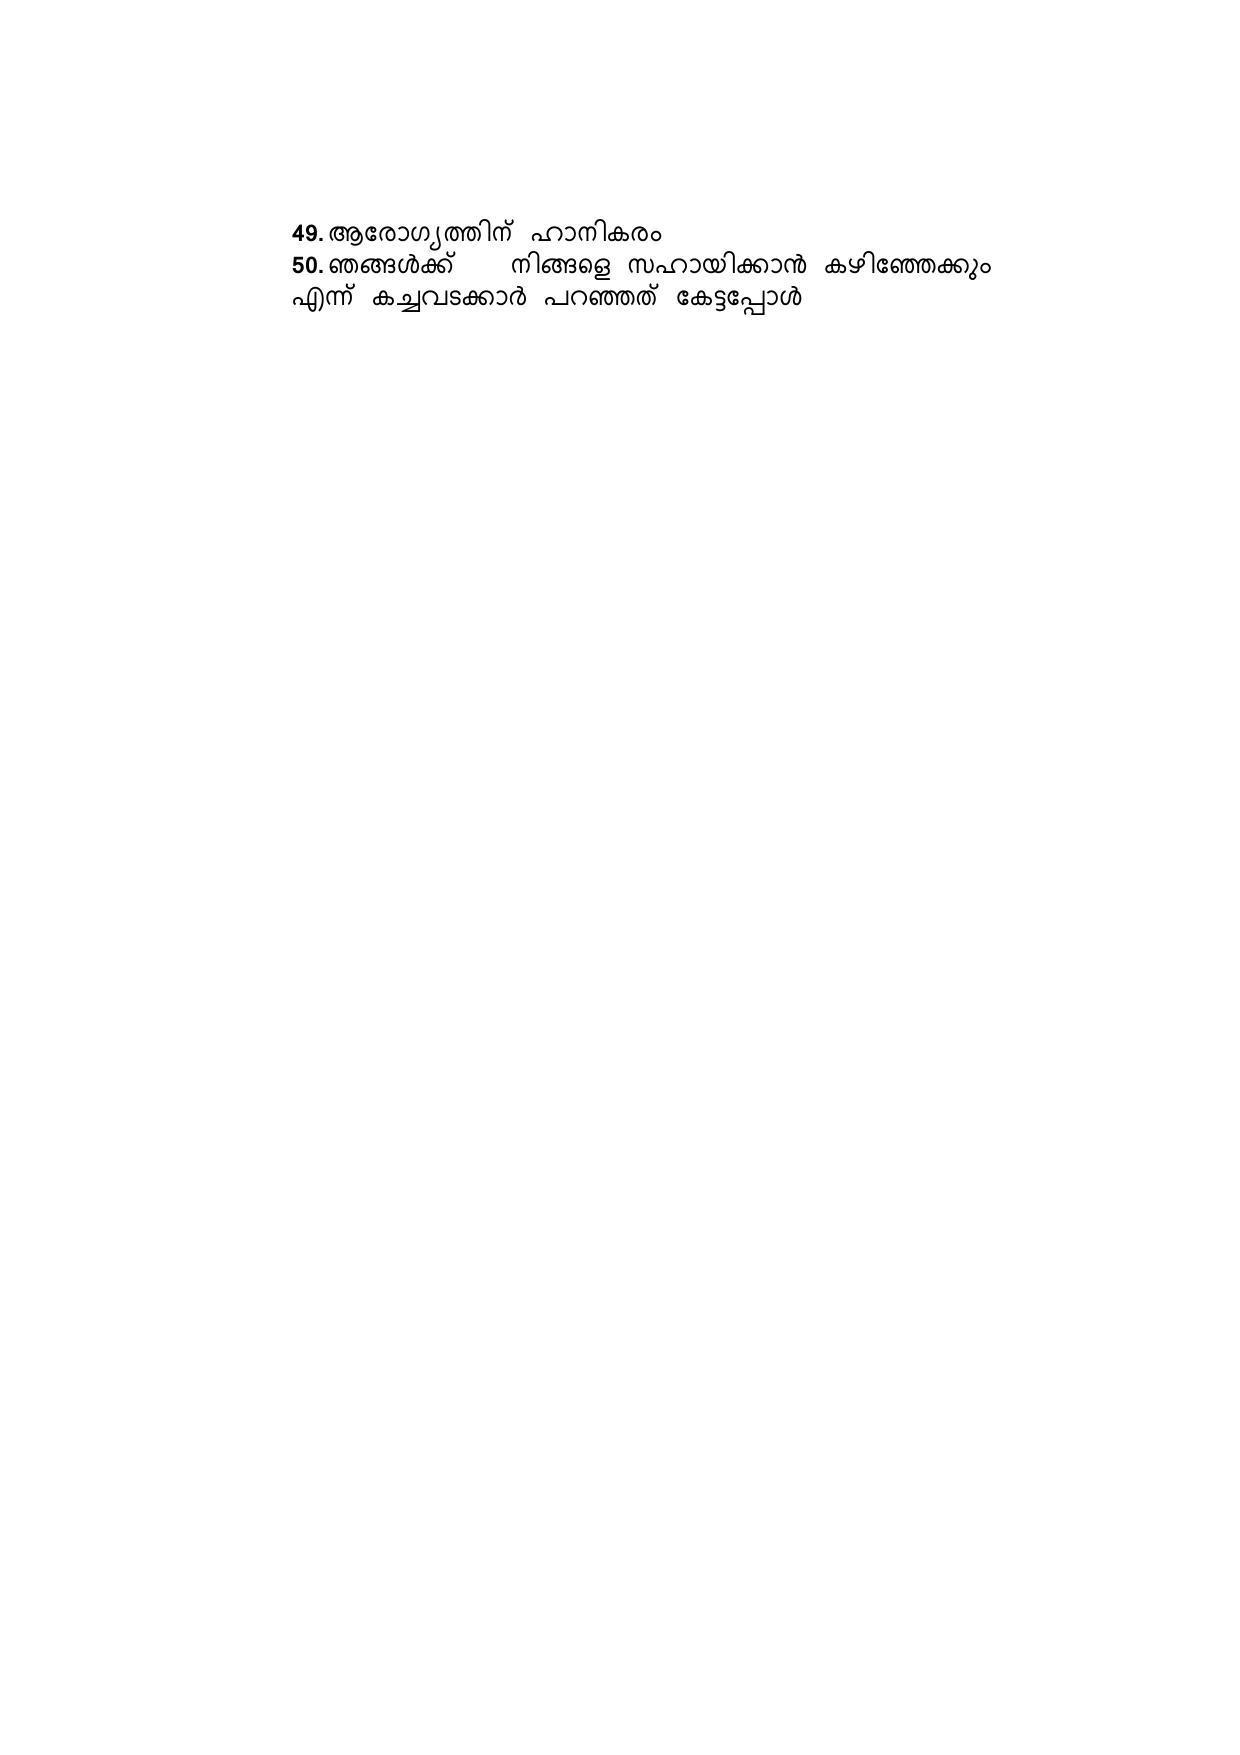 CBSE Class 12 Malayalam Marking Scheme and Solutions 2021-22 - Page 3